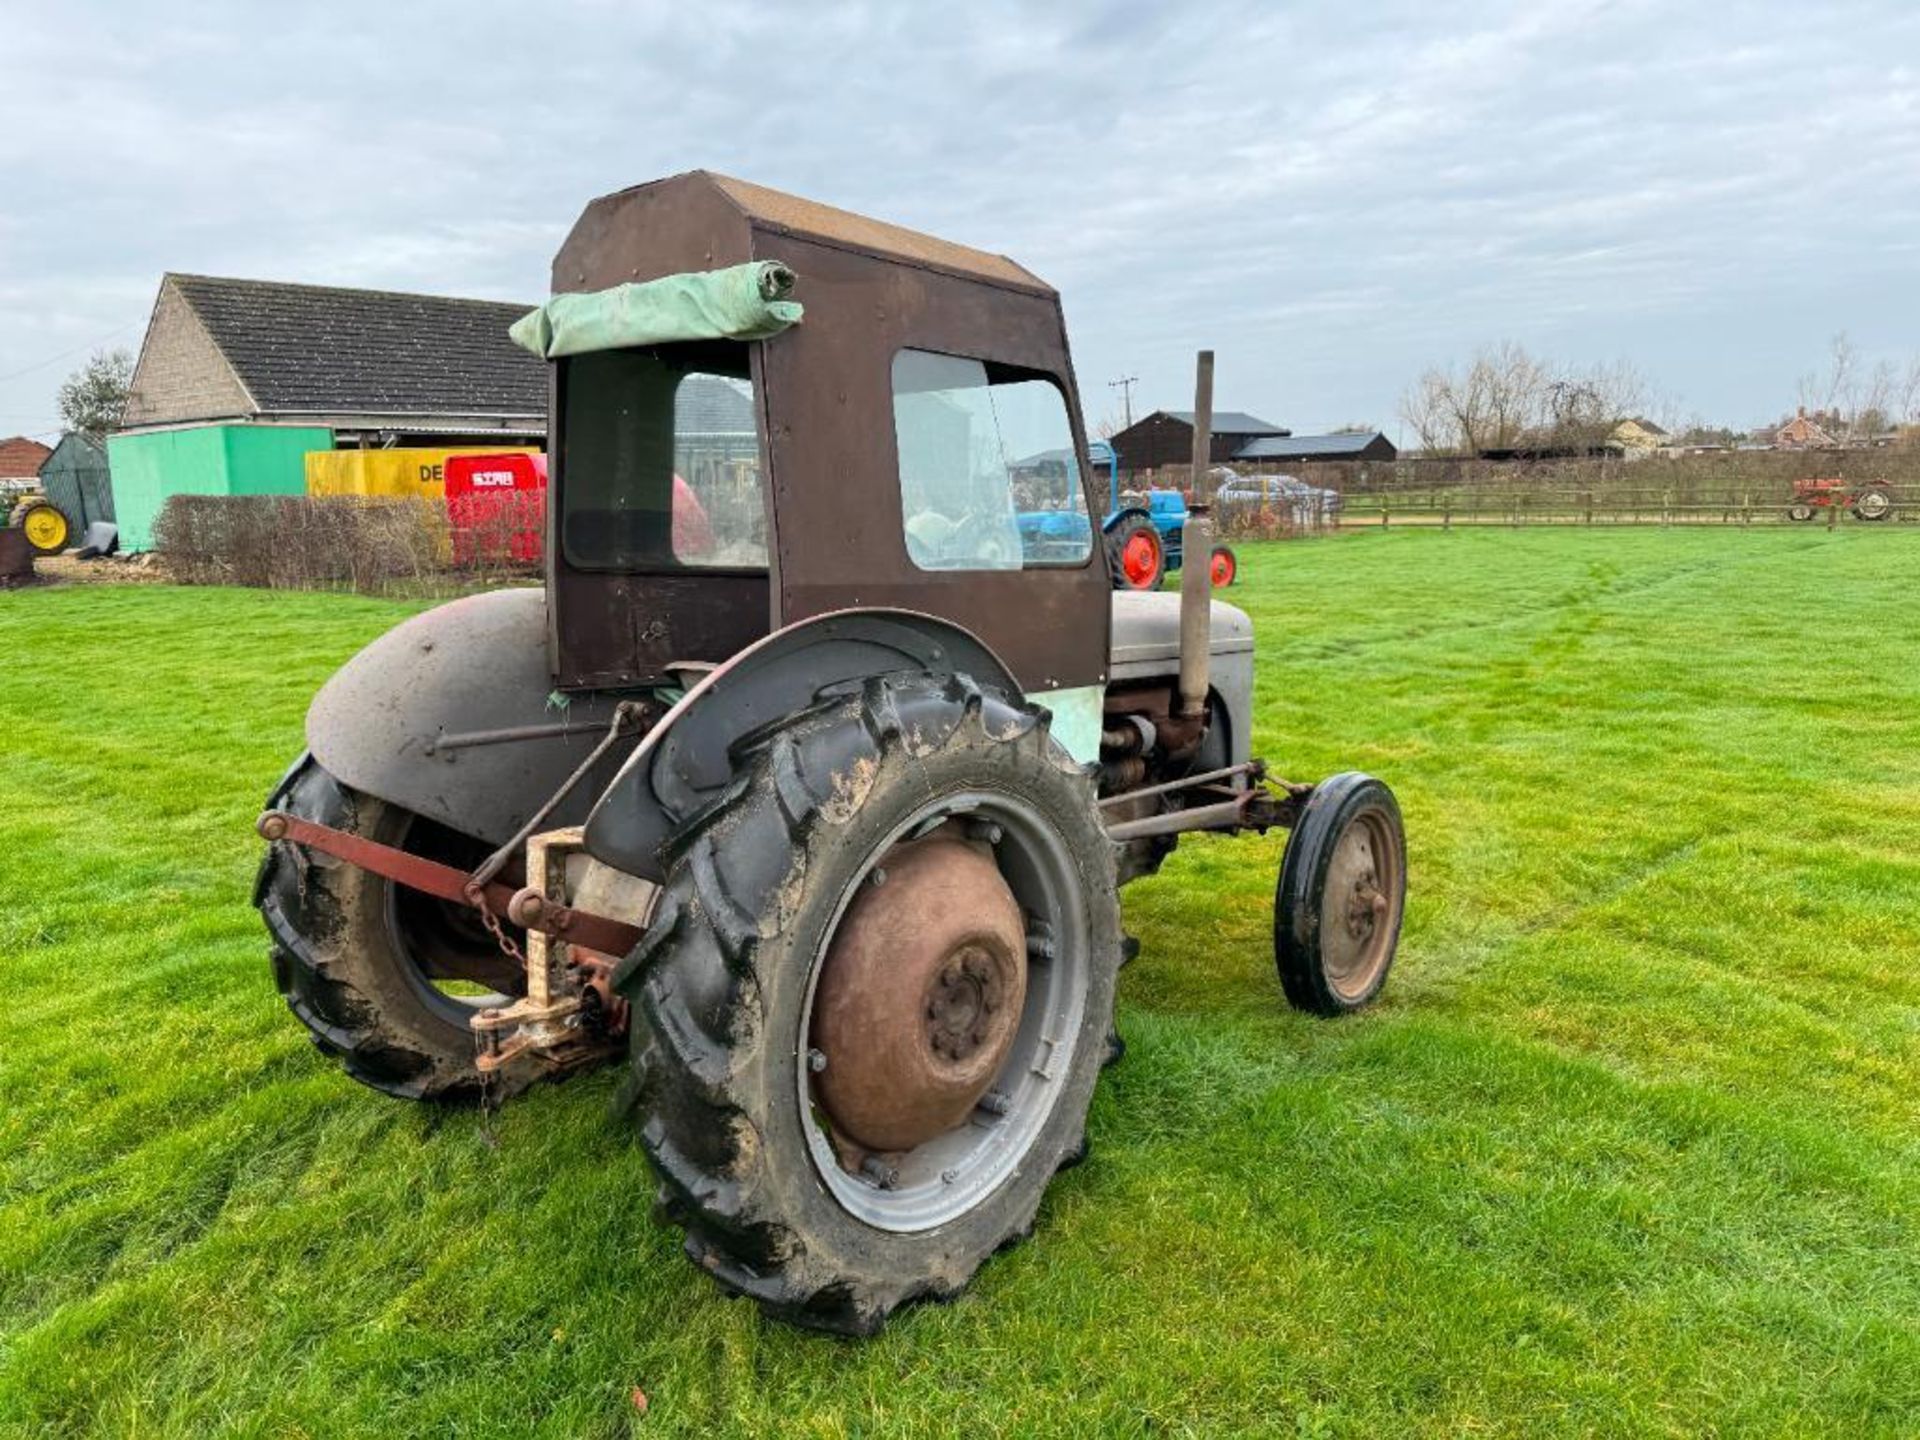 1954 Ferguson TEF 2wd diesel tractor with Clydebuilt cab, rear drawbar assembly and linkage on 11.2/ - Image 9 of 16